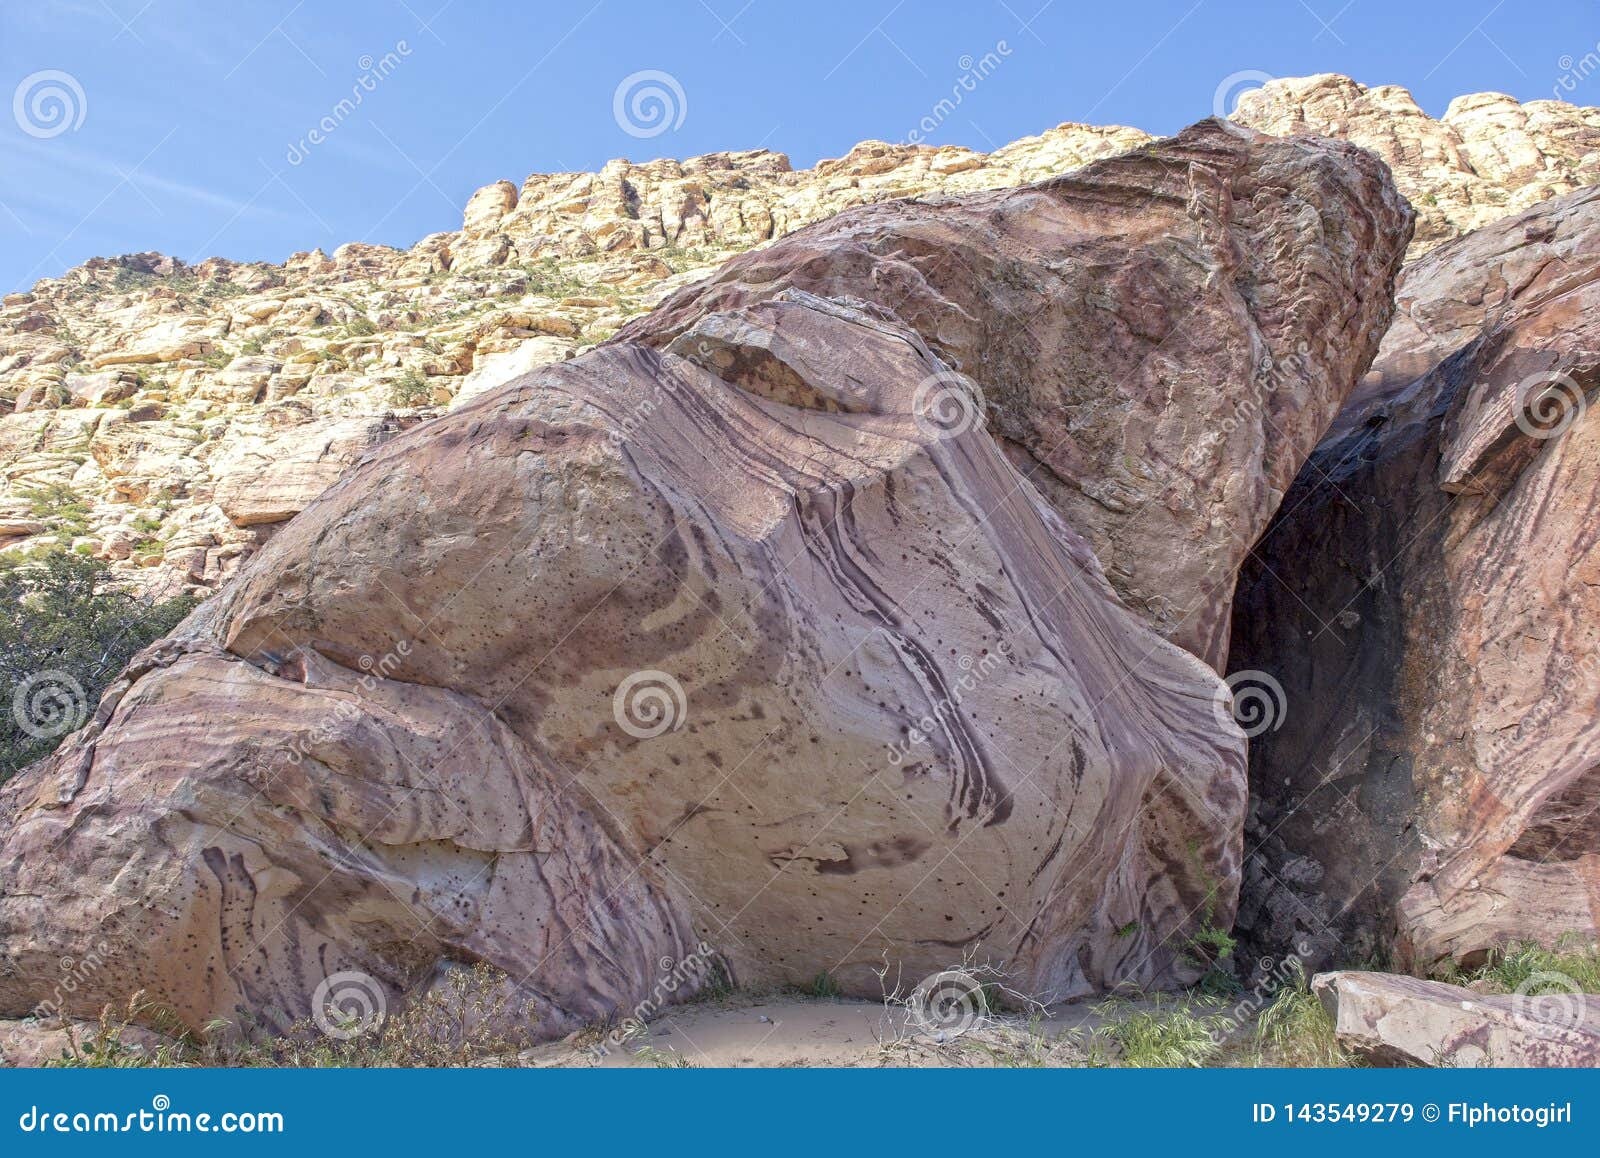 sandstone rock formation at red rock nature conservancy